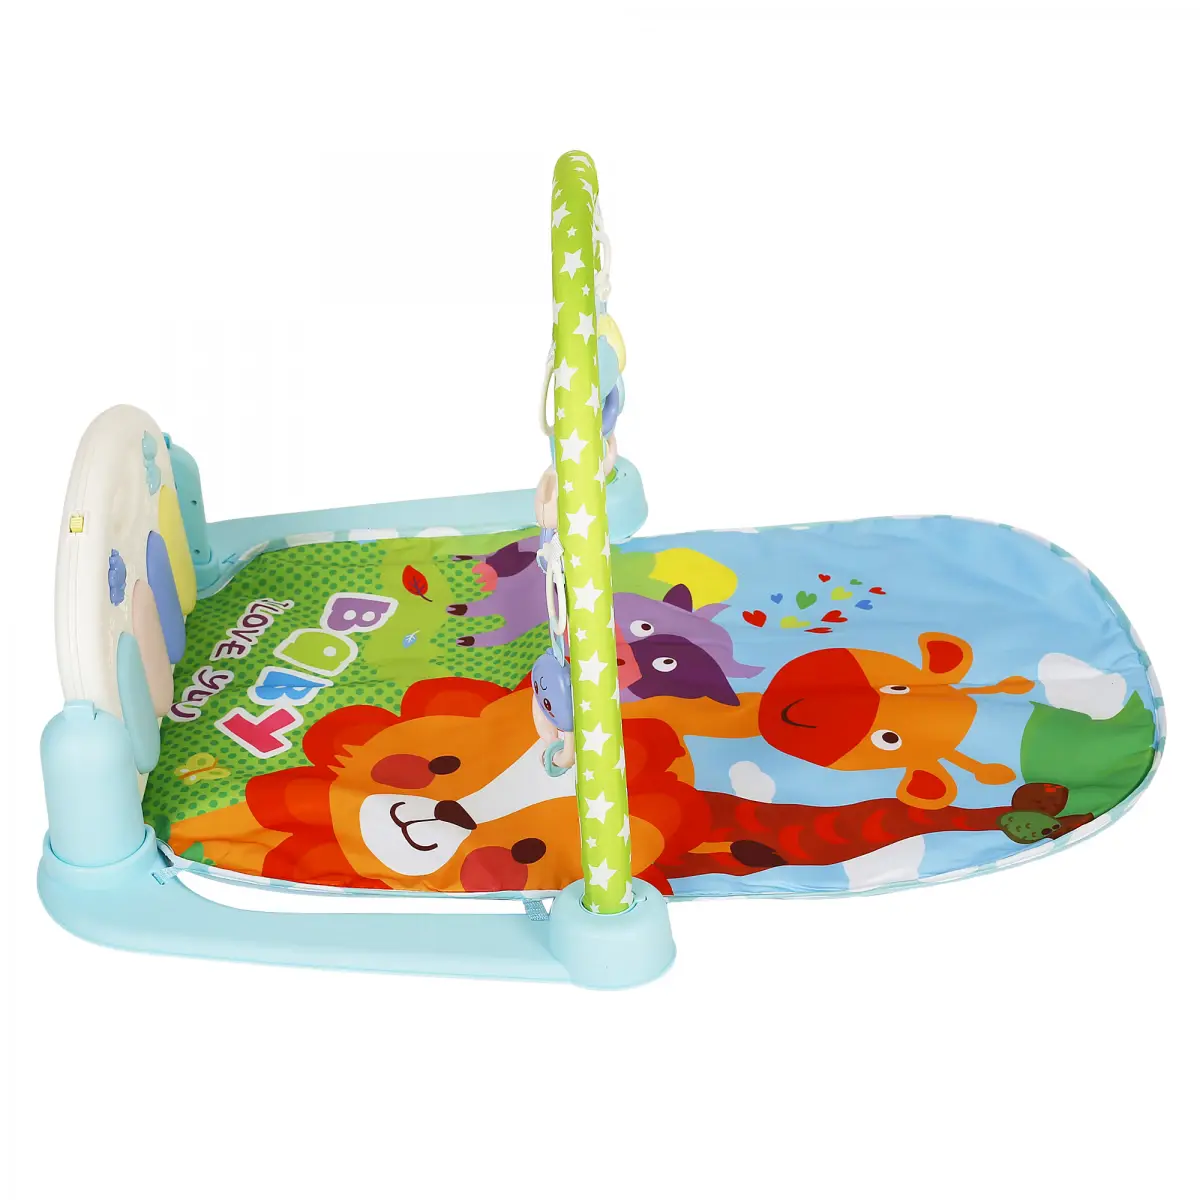 Shooting Star Baby Play Mat Gym & Fitness Rack, 6M+, Multicolour